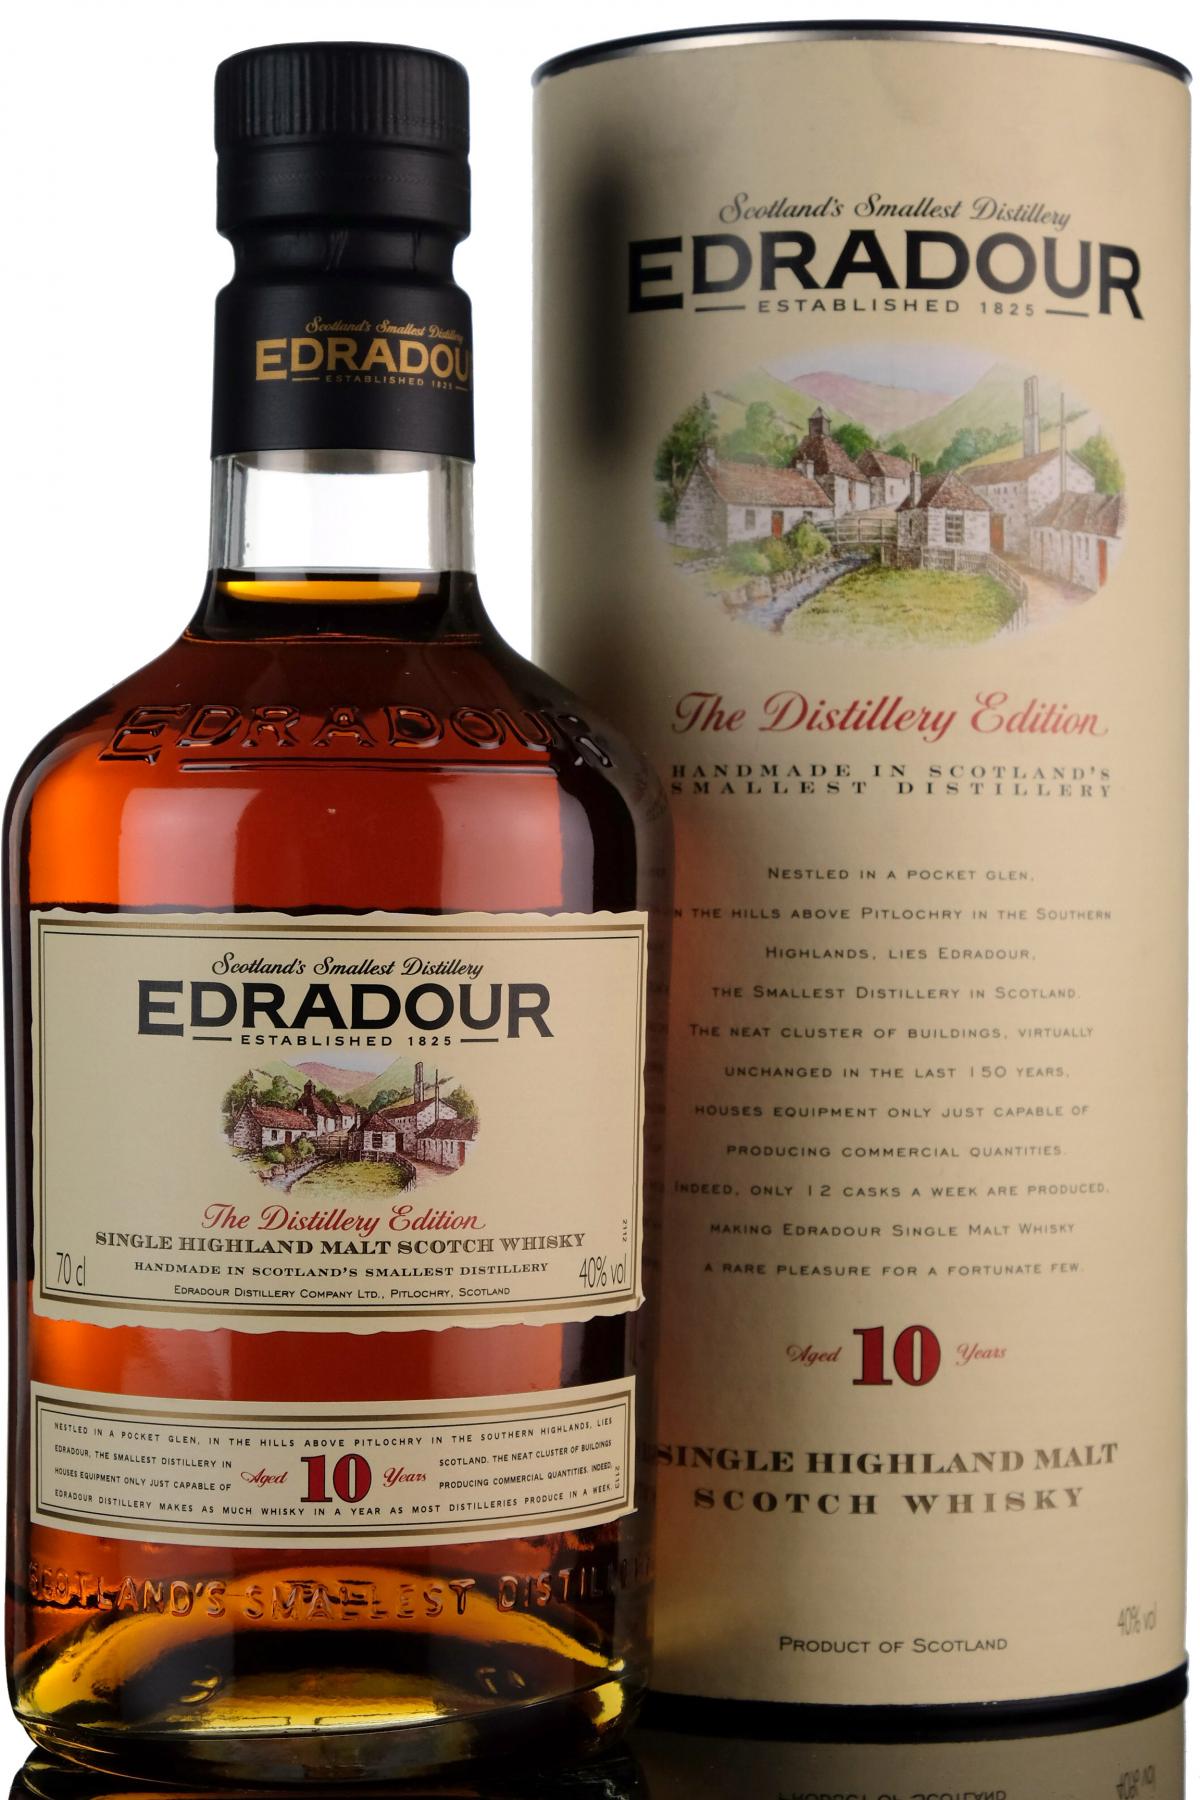 Edradour 10 Year Old - Early 2000s